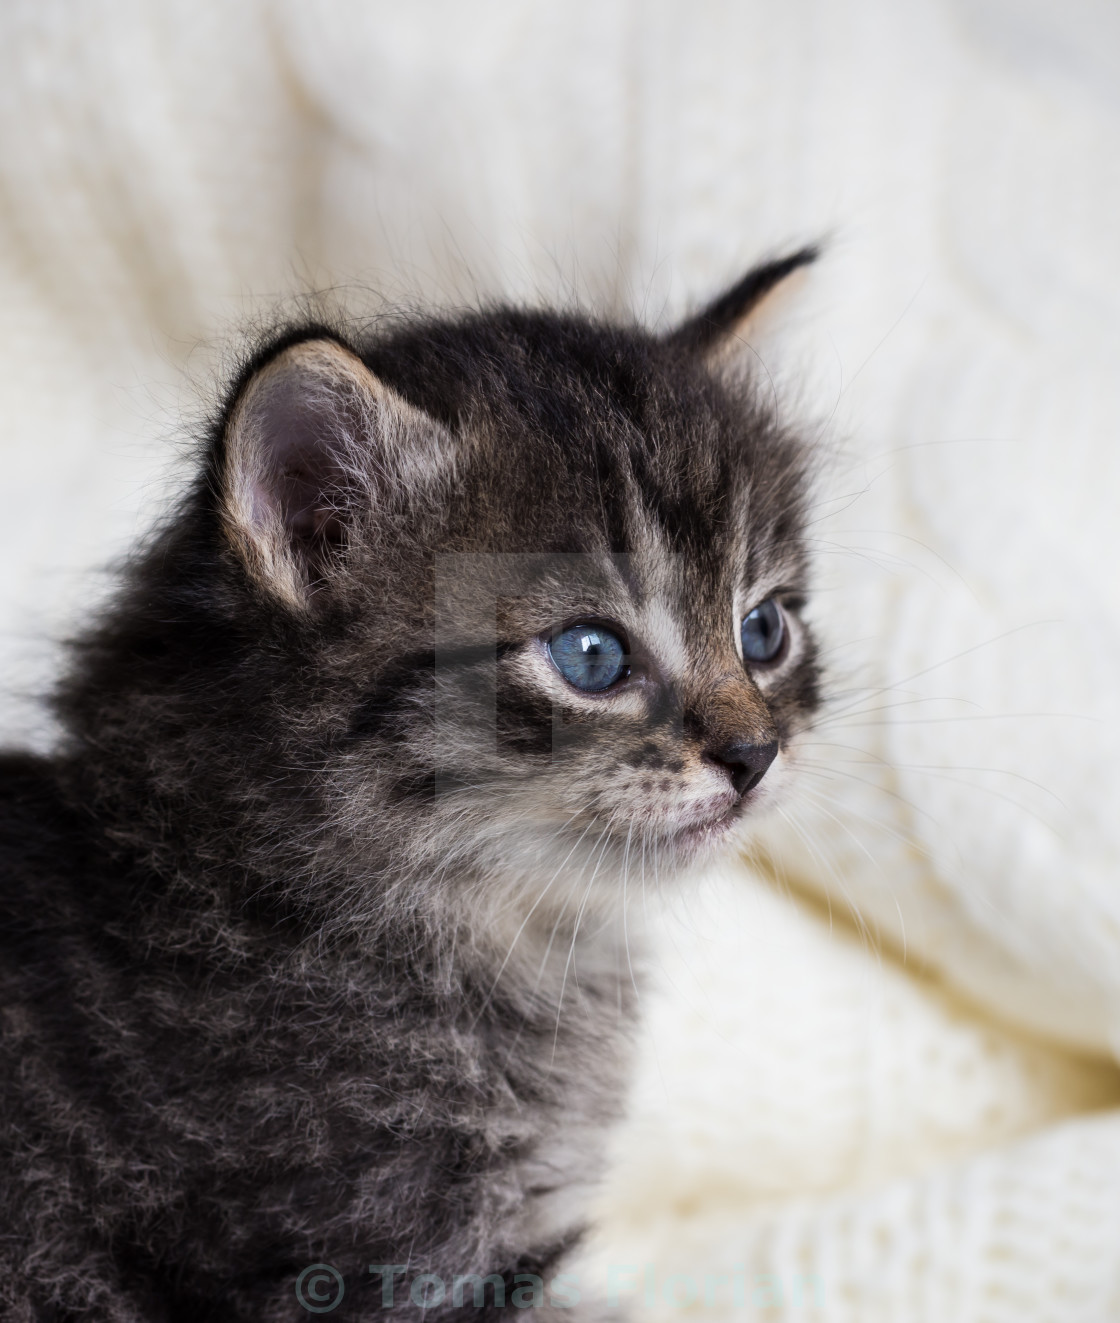 names for a blue tabby cat